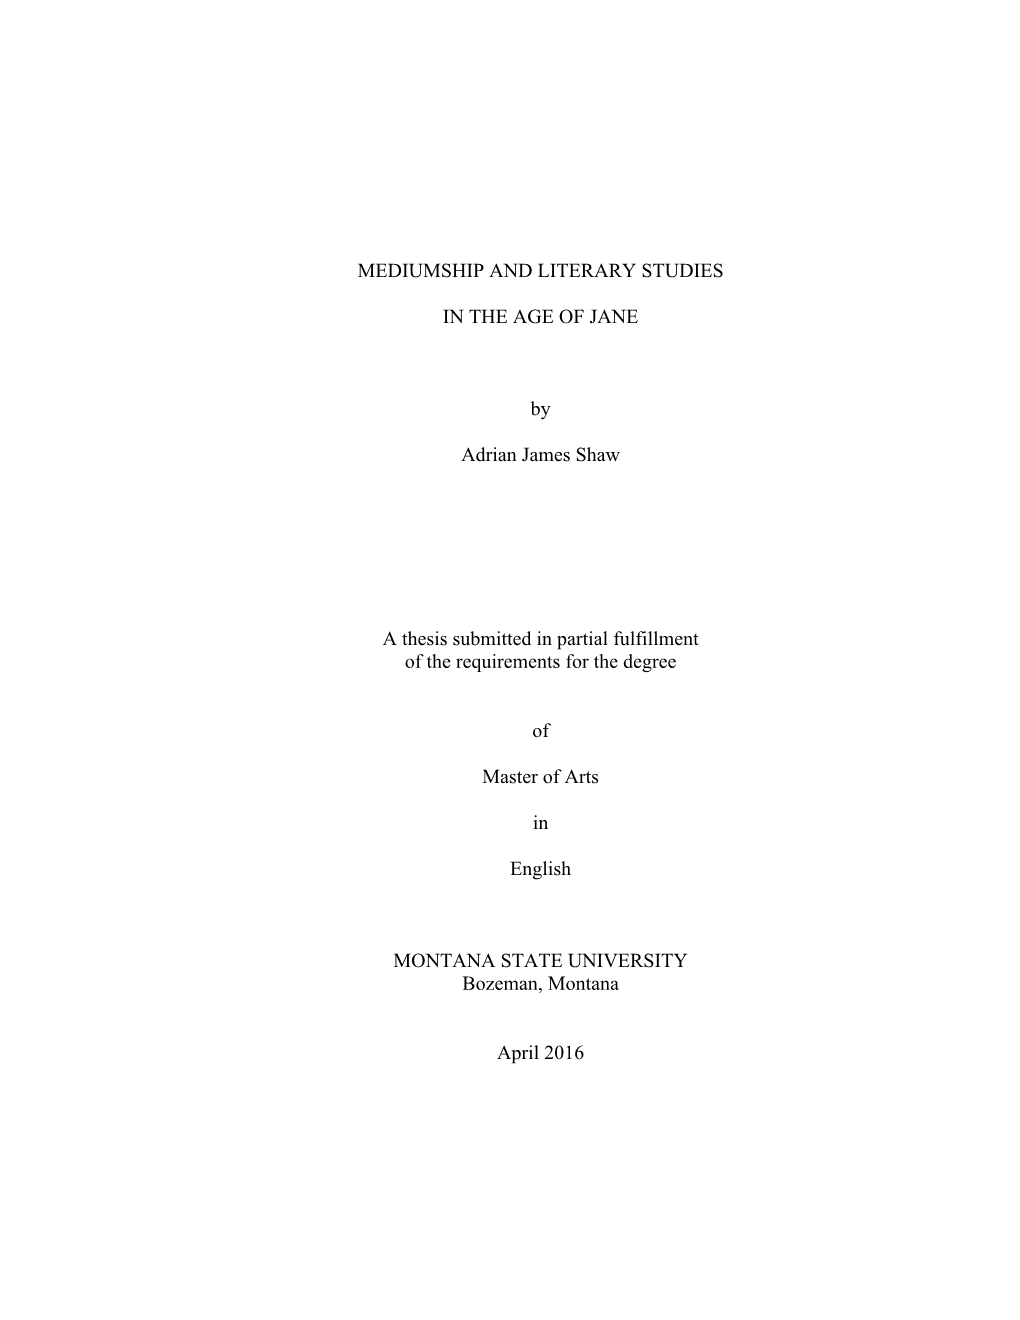 MEDIUMSHIP and LITERARY STUDIES in the AGE of JANE by Adrian James Shaw a Thesis Submitted in Partial Fulfillment of the Requir